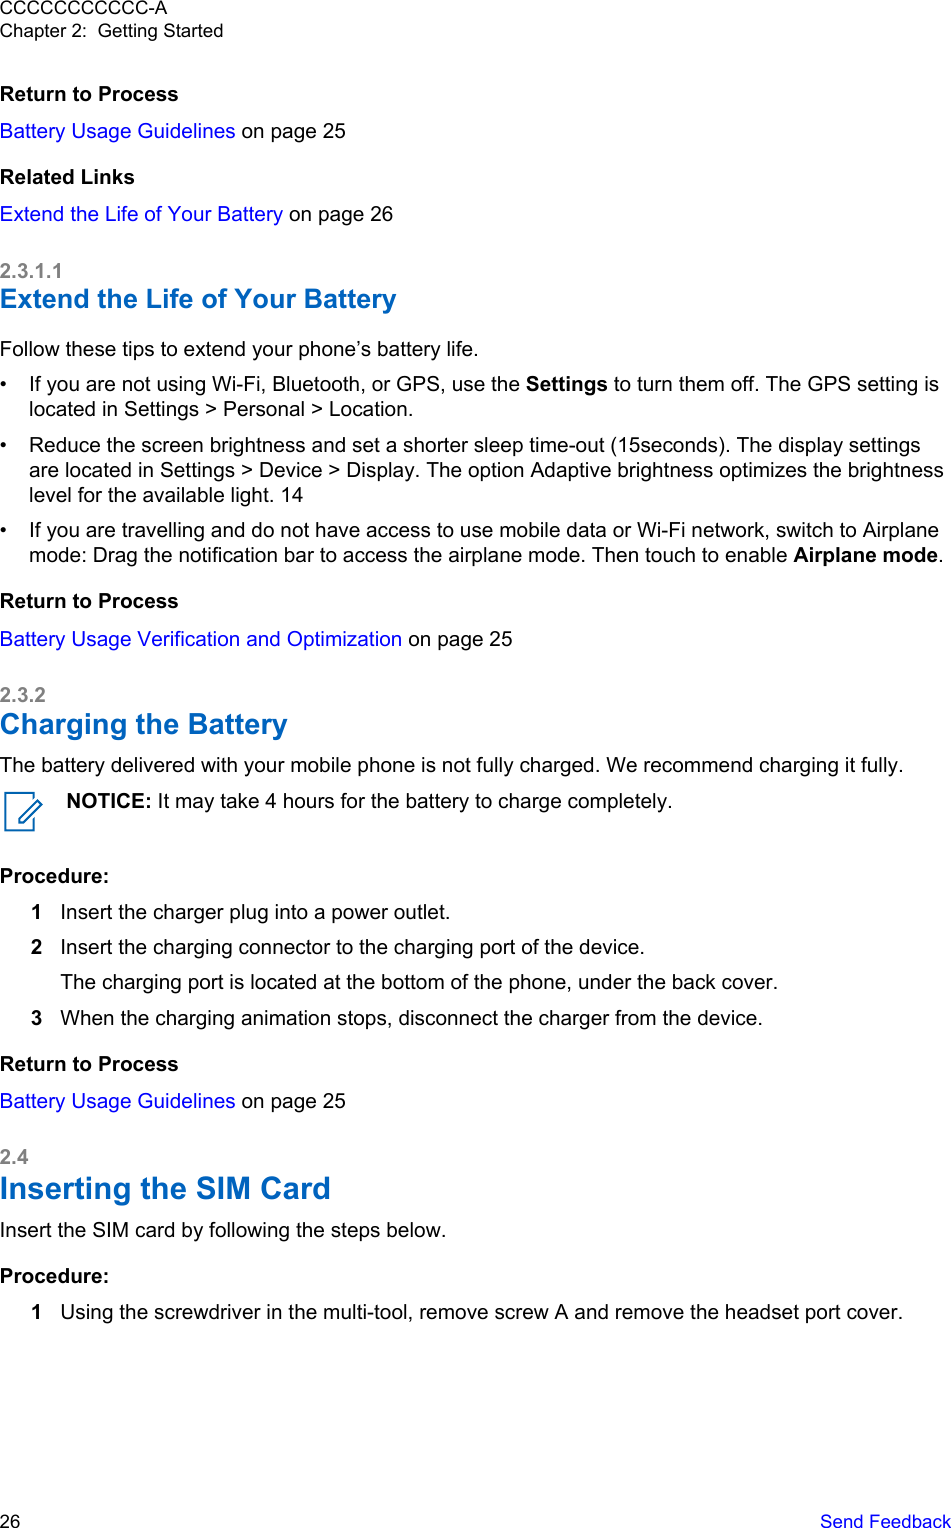 Return to ProcessBattery Usage Guidelines on page 25Related LinksExtend the Life of Your Battery on page 262.3.1.1Extend the Life of Your BatteryFollow these tips to extend your phone’s battery life.• If you are not using Wi-Fi, Bluetooth, or GPS, use the Settings to turn them off. The GPS setting islocated in Settings &gt; Personal &gt; Location.• Reduce the screen brightness and set a shorter sleep time-out (15seconds). The display settingsare located in Settings &gt; Device &gt; Display. The option Adaptive brightness optimizes the brightnesslevel for the available light. 14• If you are travelling and do not have access to use mobile data or Wi-Fi network, switch to Airplanemode: Drag the notification bar to access the airplane mode. Then touch to enable Airplane mode.Return to ProcessBattery Usage Verification and Optimization on page 252.3.2Charging the BatteryThe battery delivered with your mobile phone is not fully charged. We recommend charging it fully.NOTICE: It may take 4 hours for the battery to charge completely.Procedure:1Insert the charger plug into a power outlet.2Insert the charging connector to the charging port of the device.The charging port is located at the bottom of the phone, under the back cover.3When the charging animation stops, disconnect the charger from the device.Return to ProcessBattery Usage Guidelines on page 252.4Inserting the SIM CardInsert the SIM card by following the steps below.Procedure:1Using the screwdriver in the multi-tool, remove screw A and remove the headset port cover.CCCCCCCCCCC-AChapter 2:  Getting Started26   Send Feedback